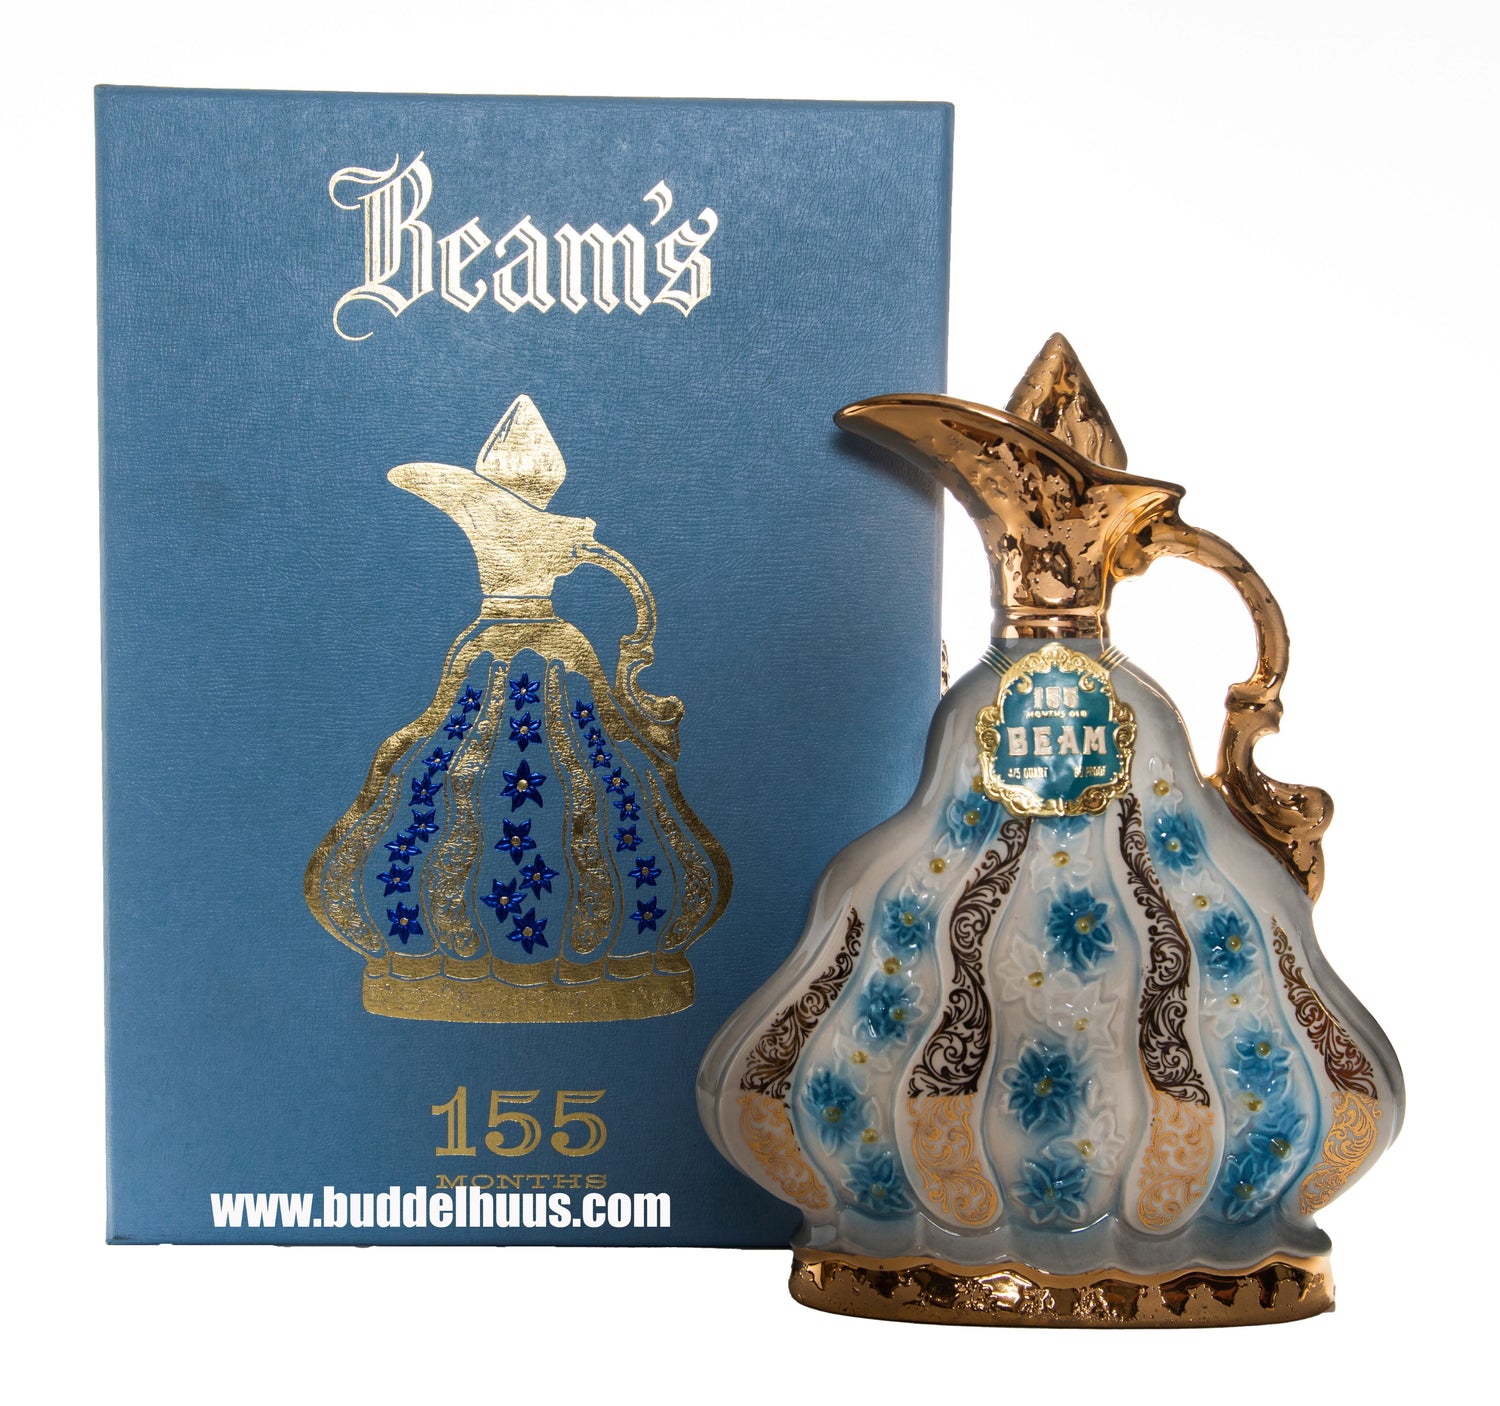 Jim Beam 155 Month Old Gold and Blue Floral Regal Decanter (1970s)